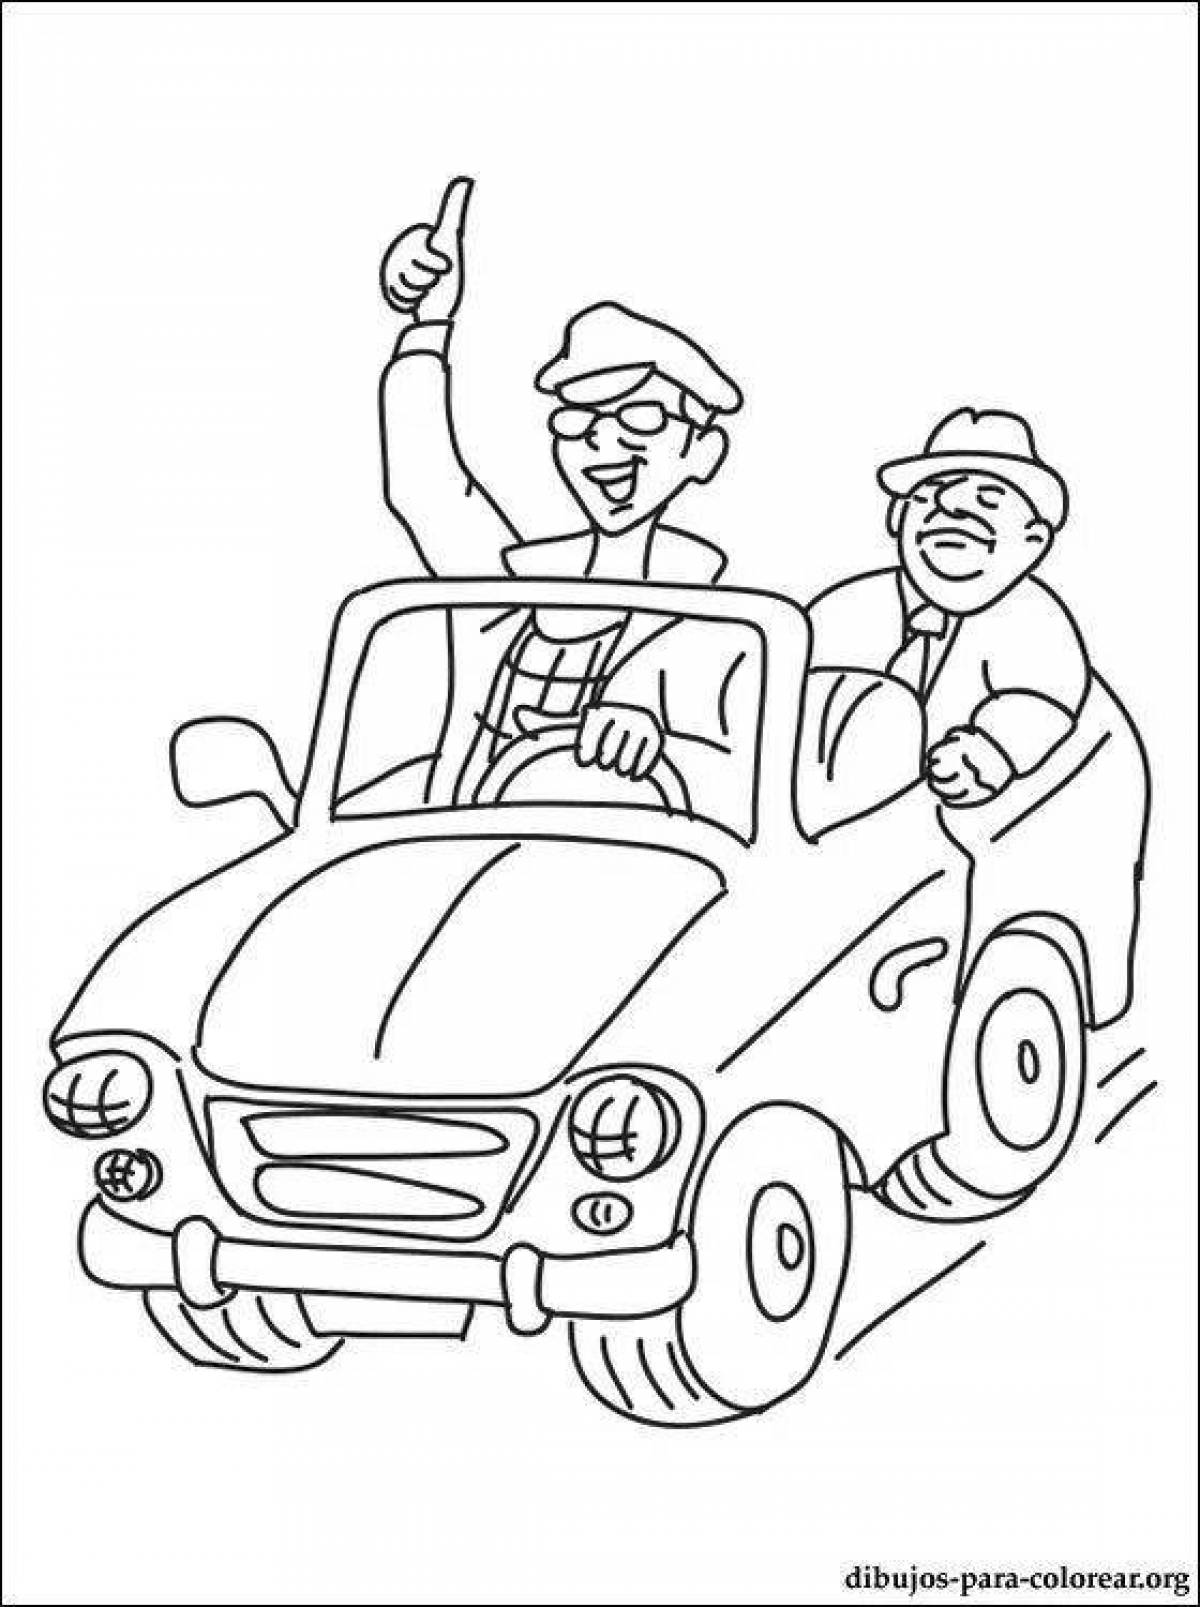 Dynamic driver coloring page